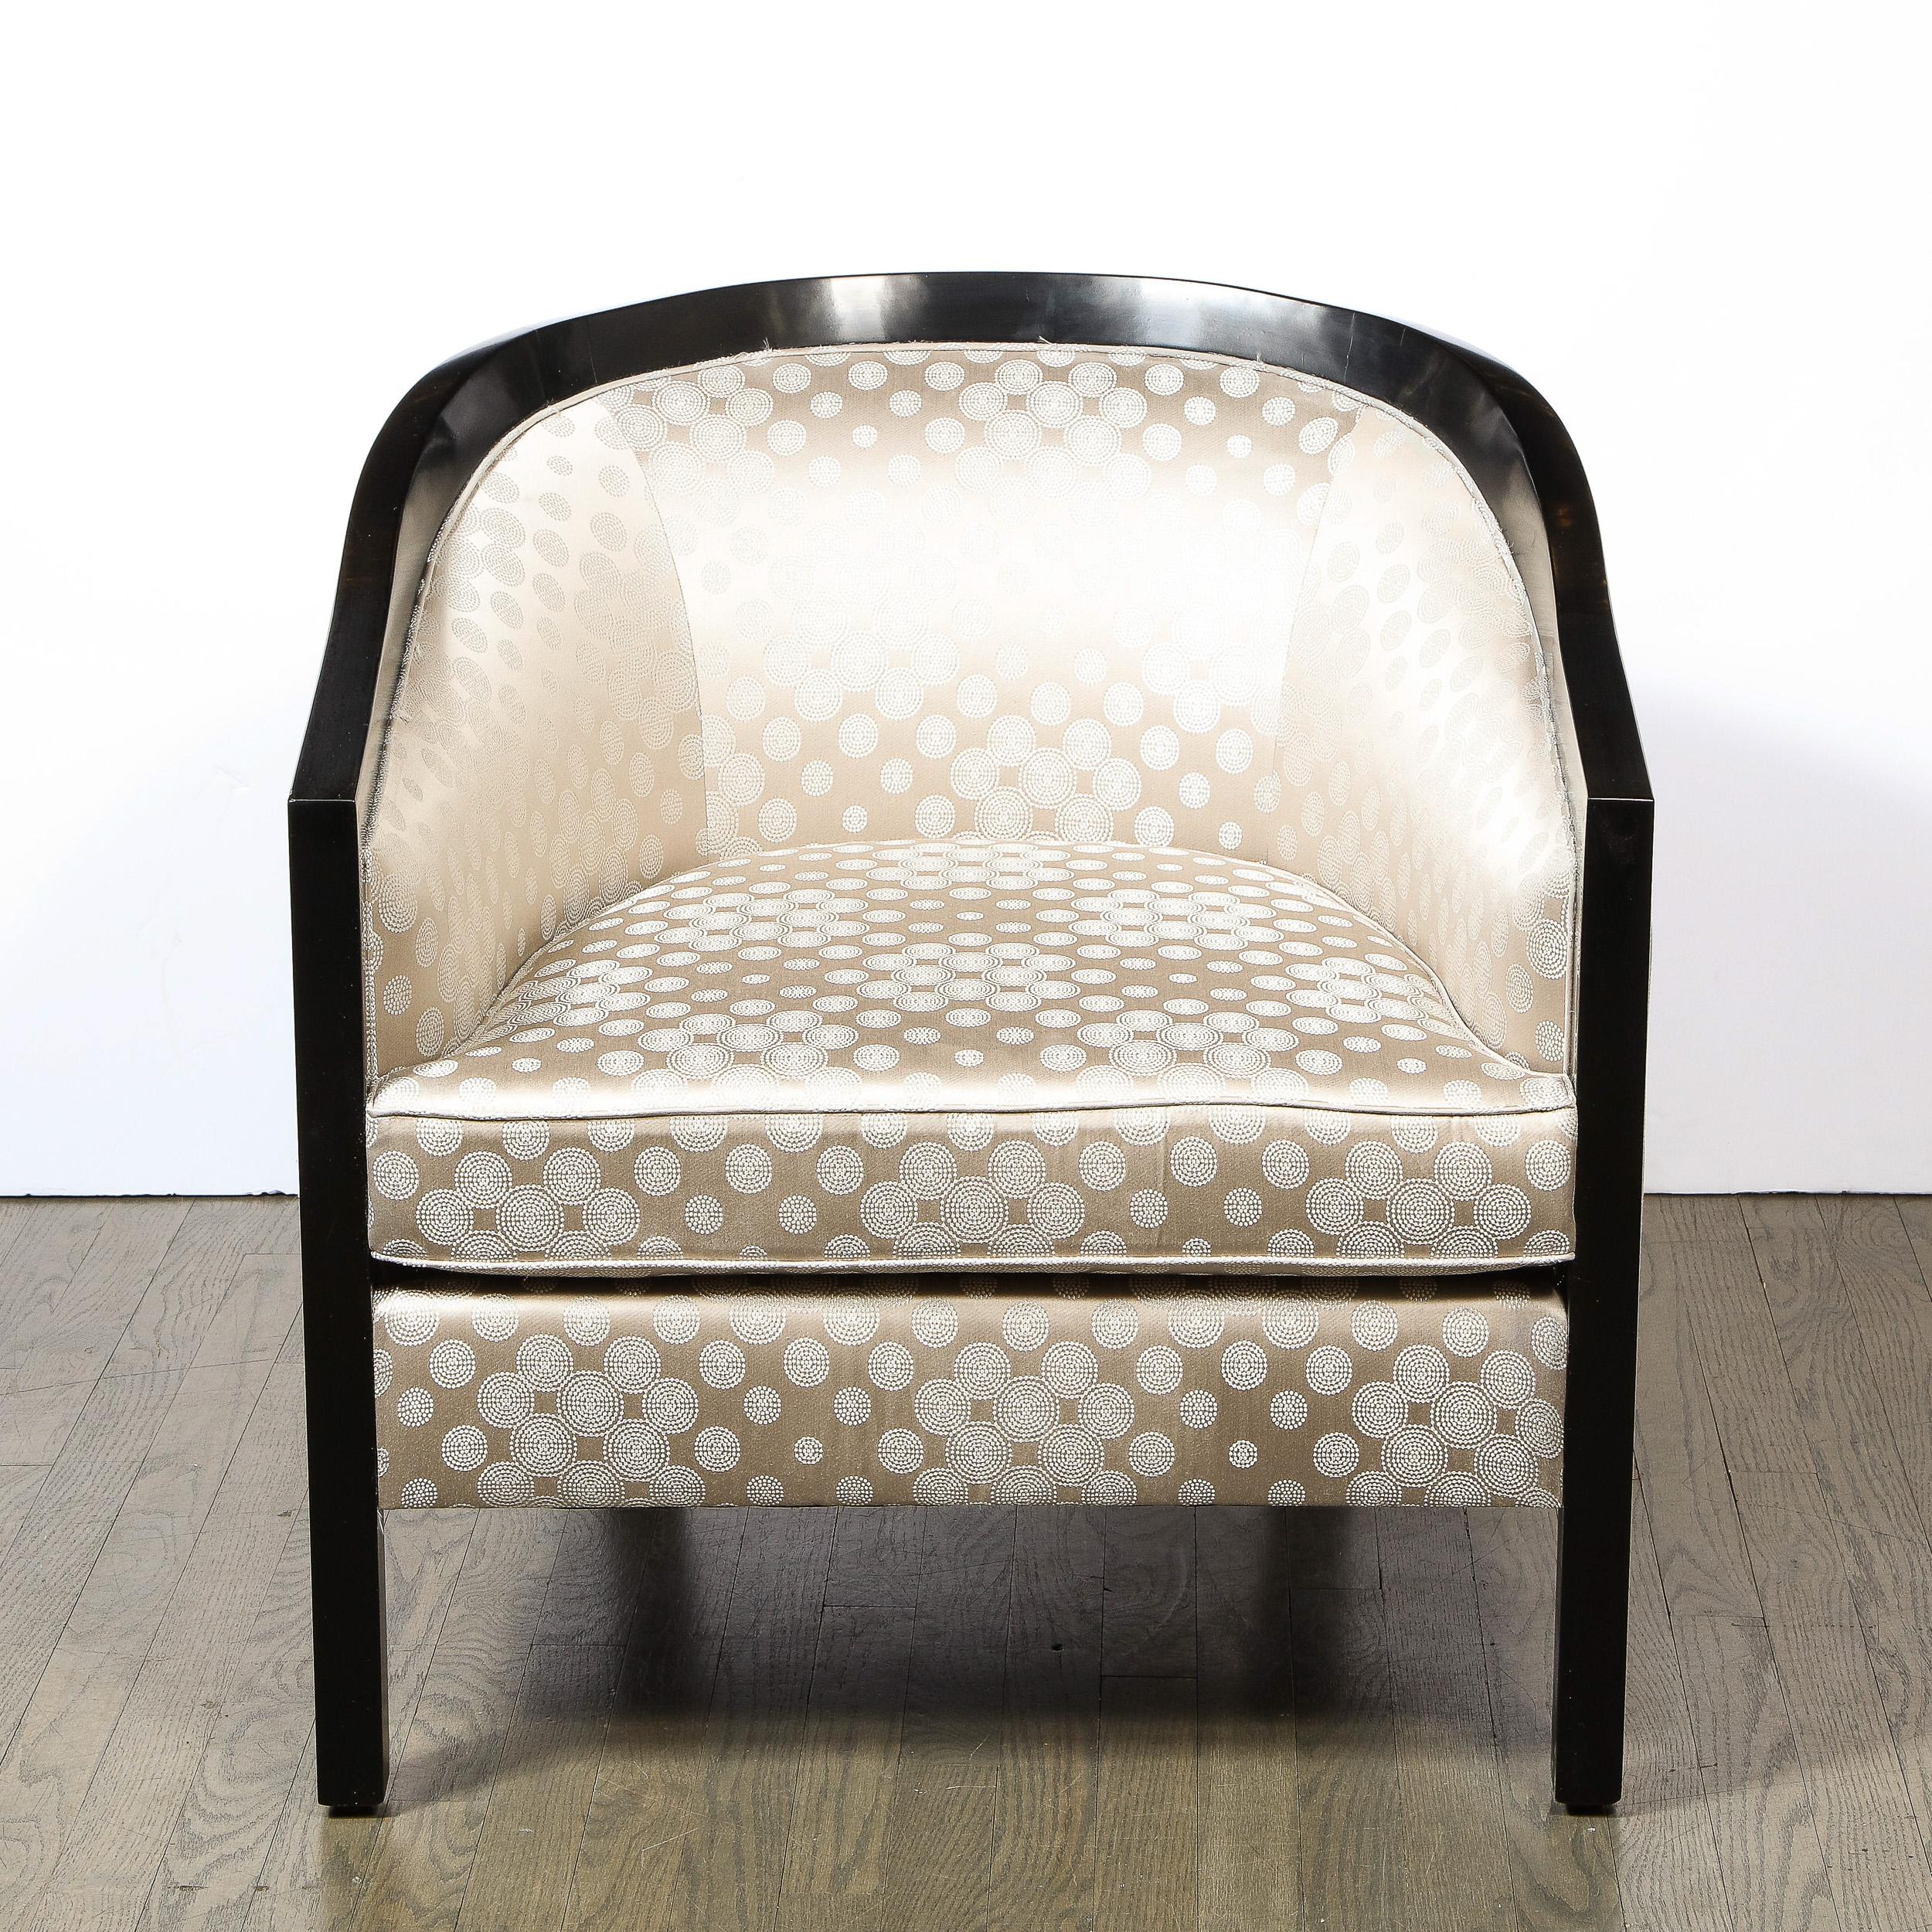 This stunning and quintessentially Mid-Century Modern barrel back lounge/club chair was designed by the illustrious American designer James Mont, circa 1950. Mont was renowned for assimilating elements of classical and Art Deco design into a modern